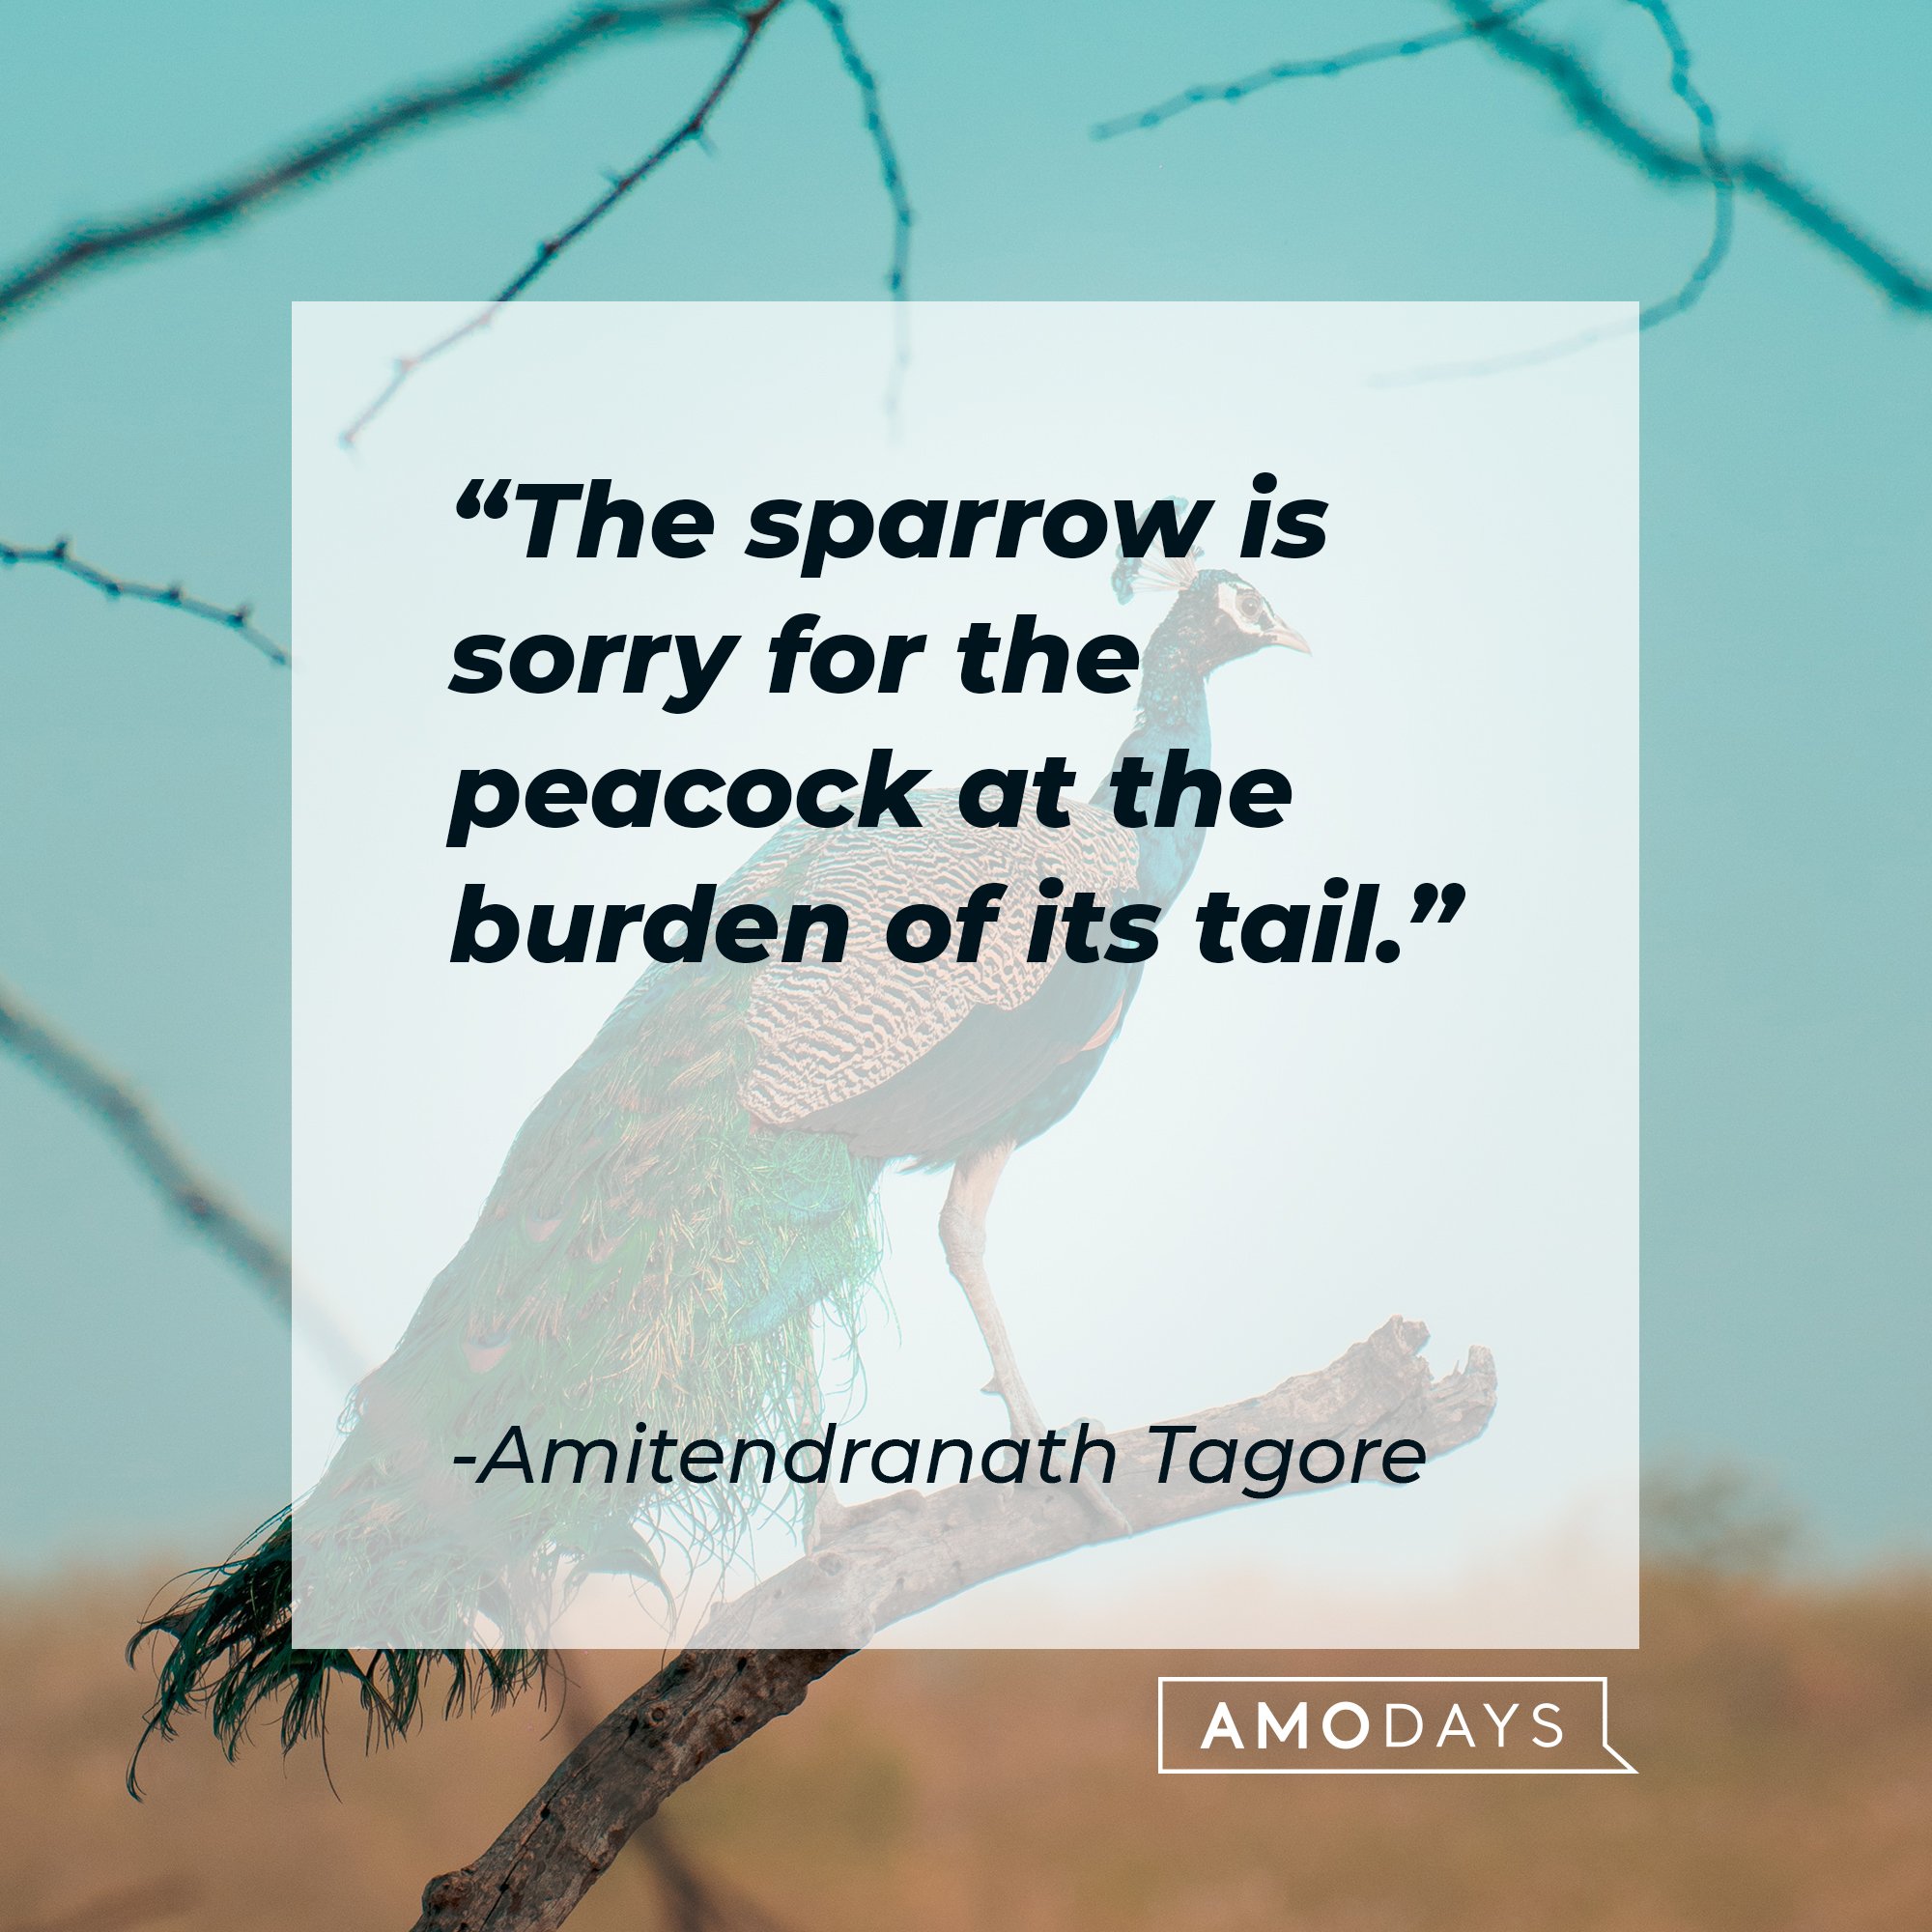 Amitendranath Tagore’s "The sparrow is sorry for the peacock at the burden of its tail." | Image: AmoDays